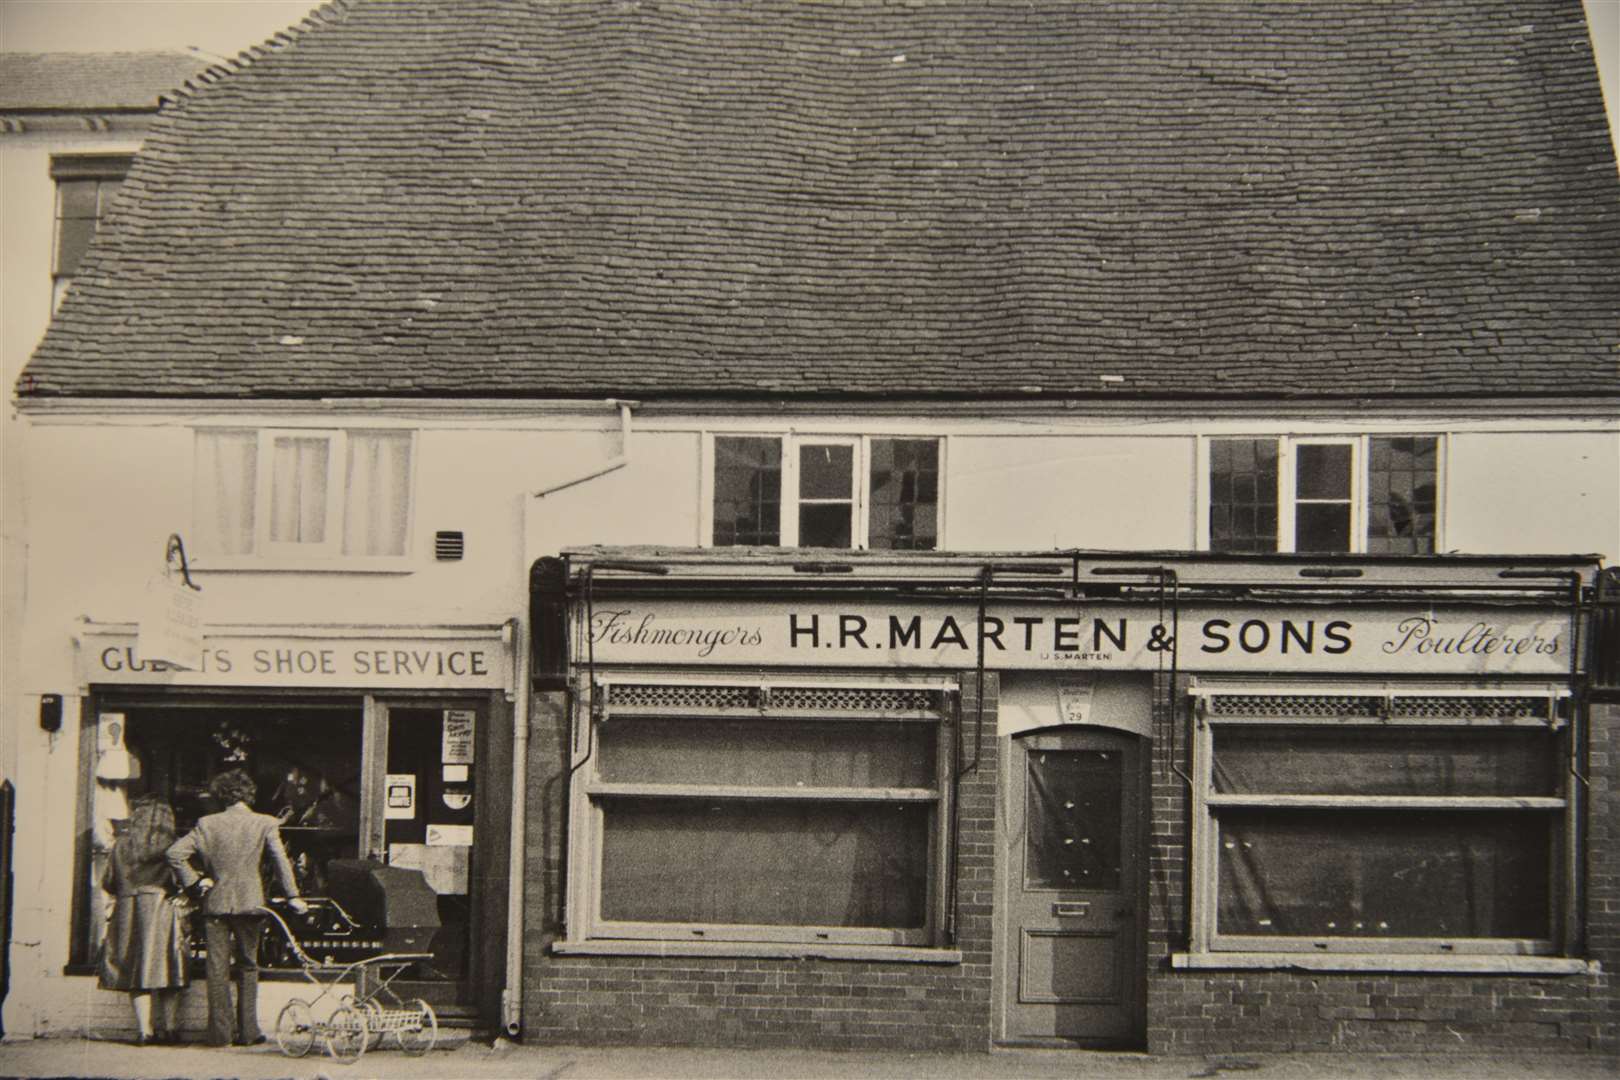 Shoe shop and Fishmongers taken in the 1970's. Image: The Malling Society